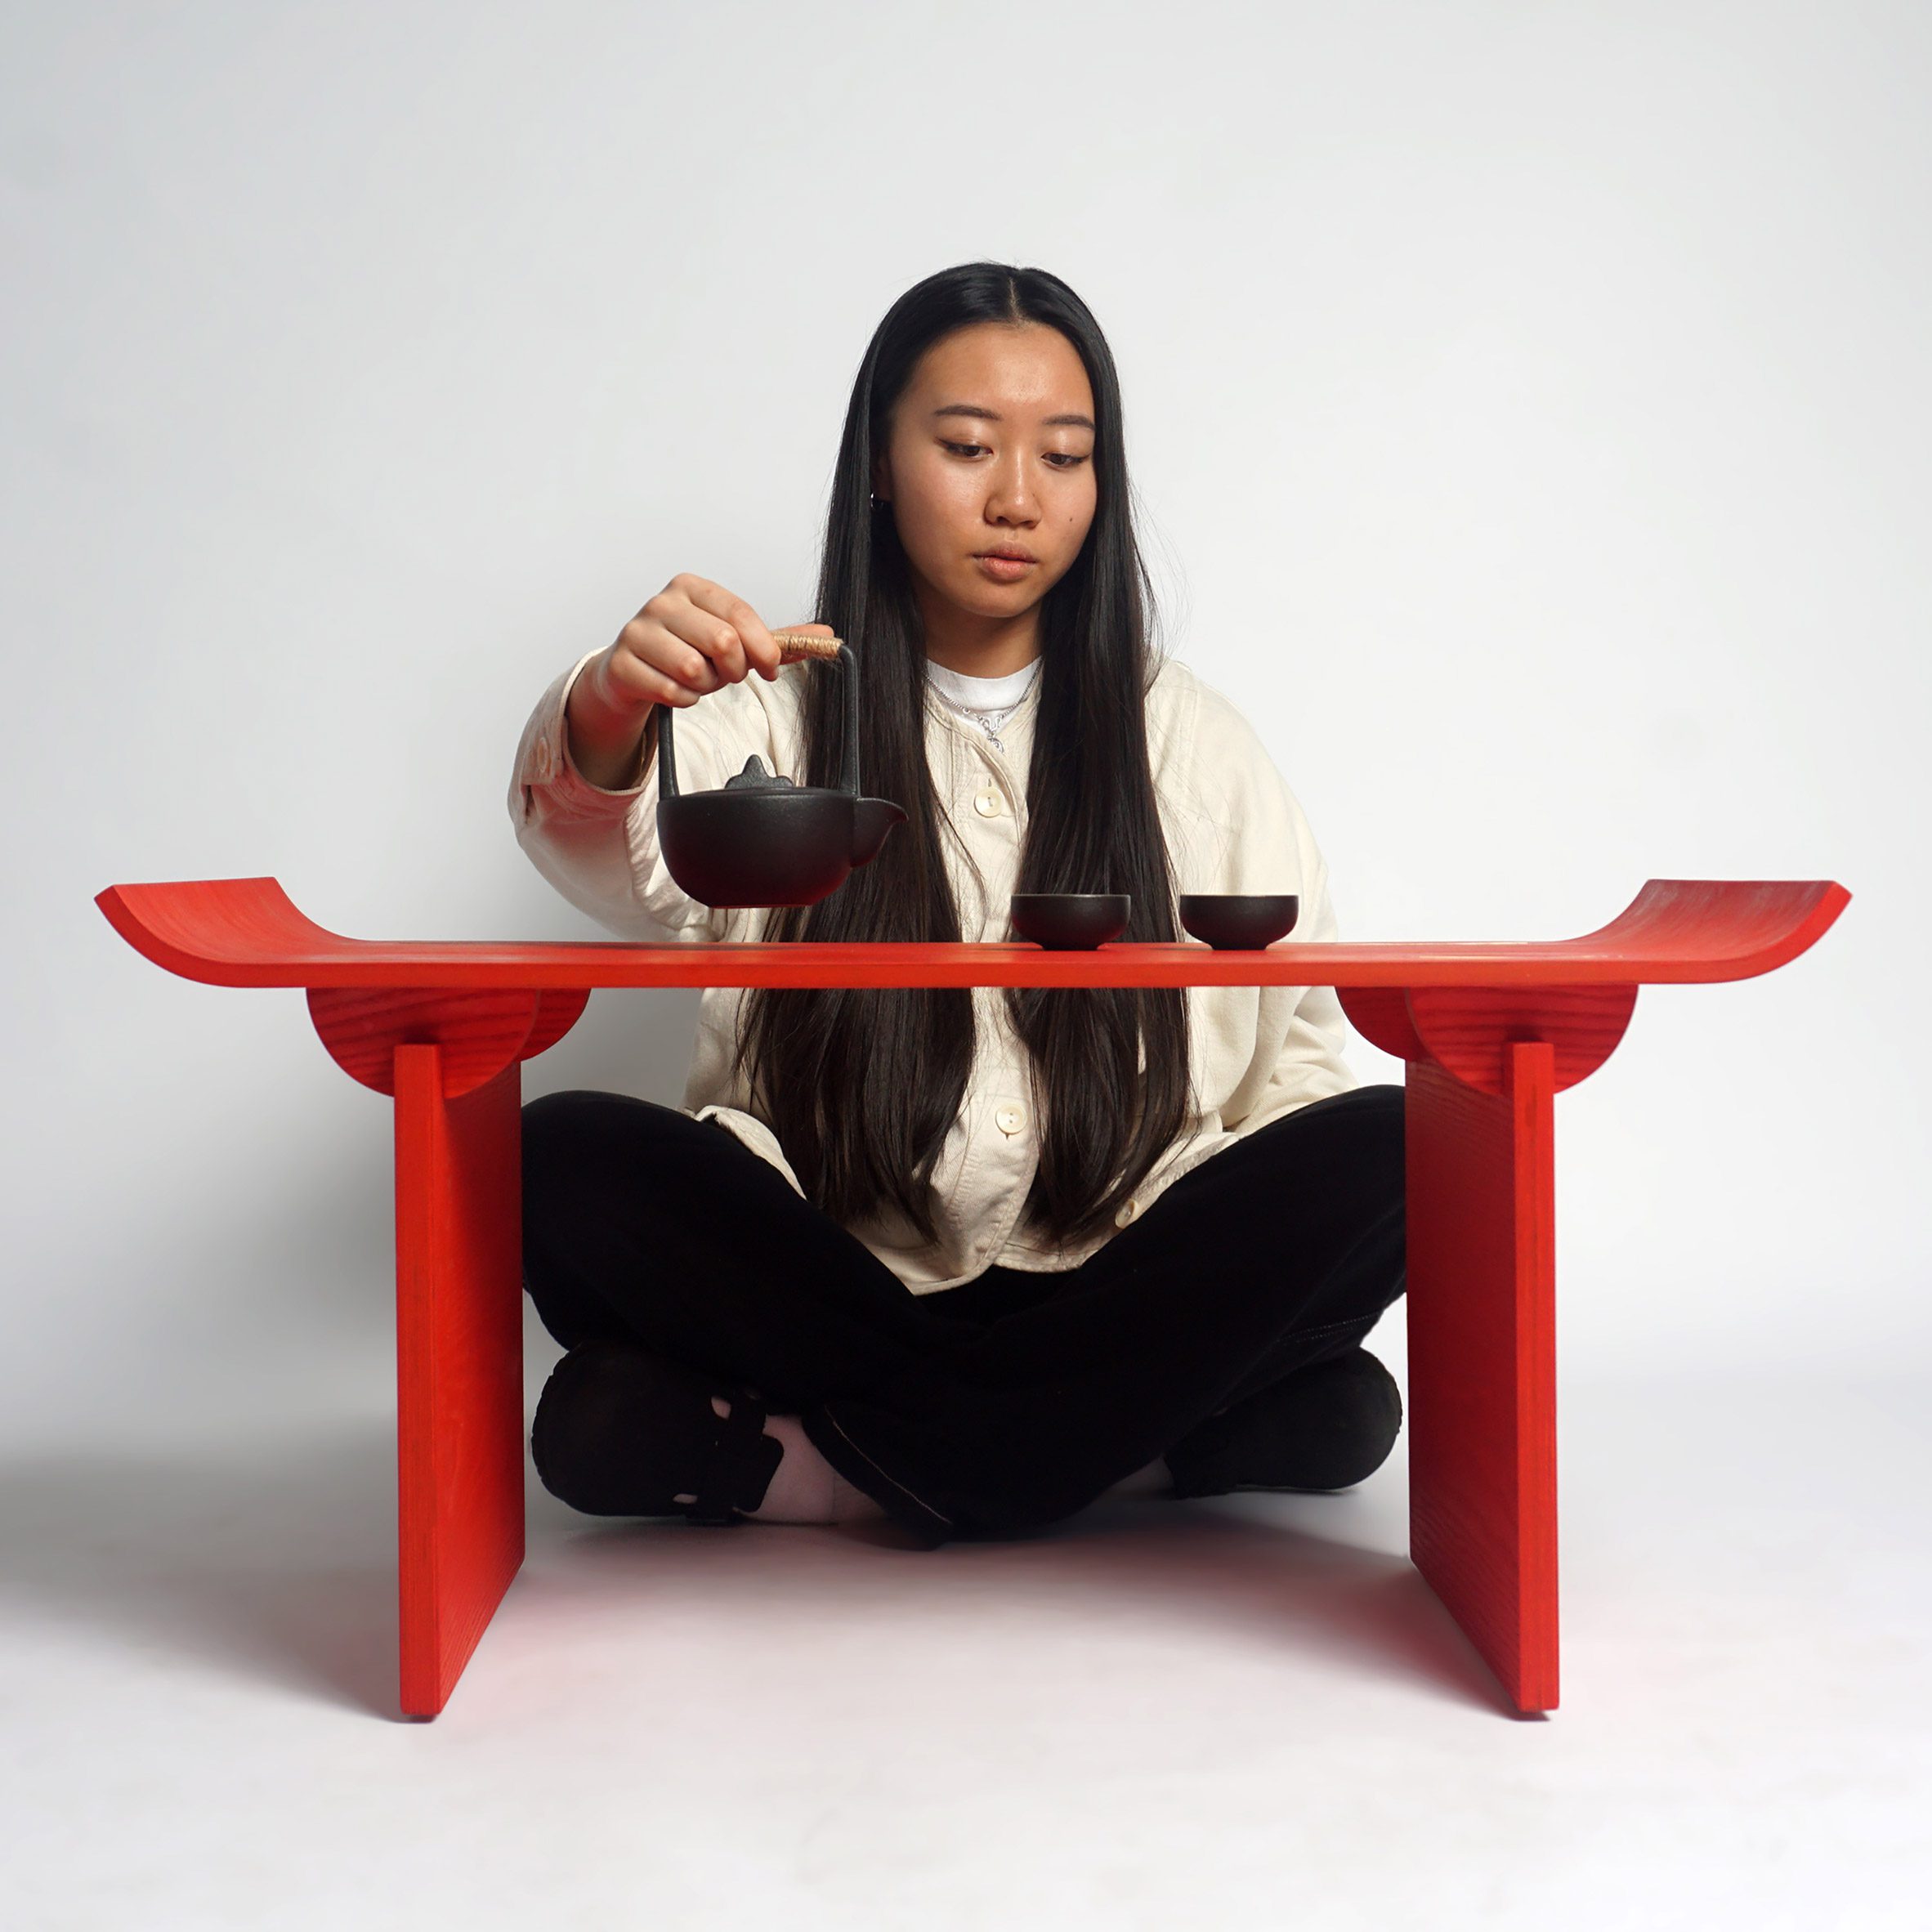 Person sitting at red table pouring tea